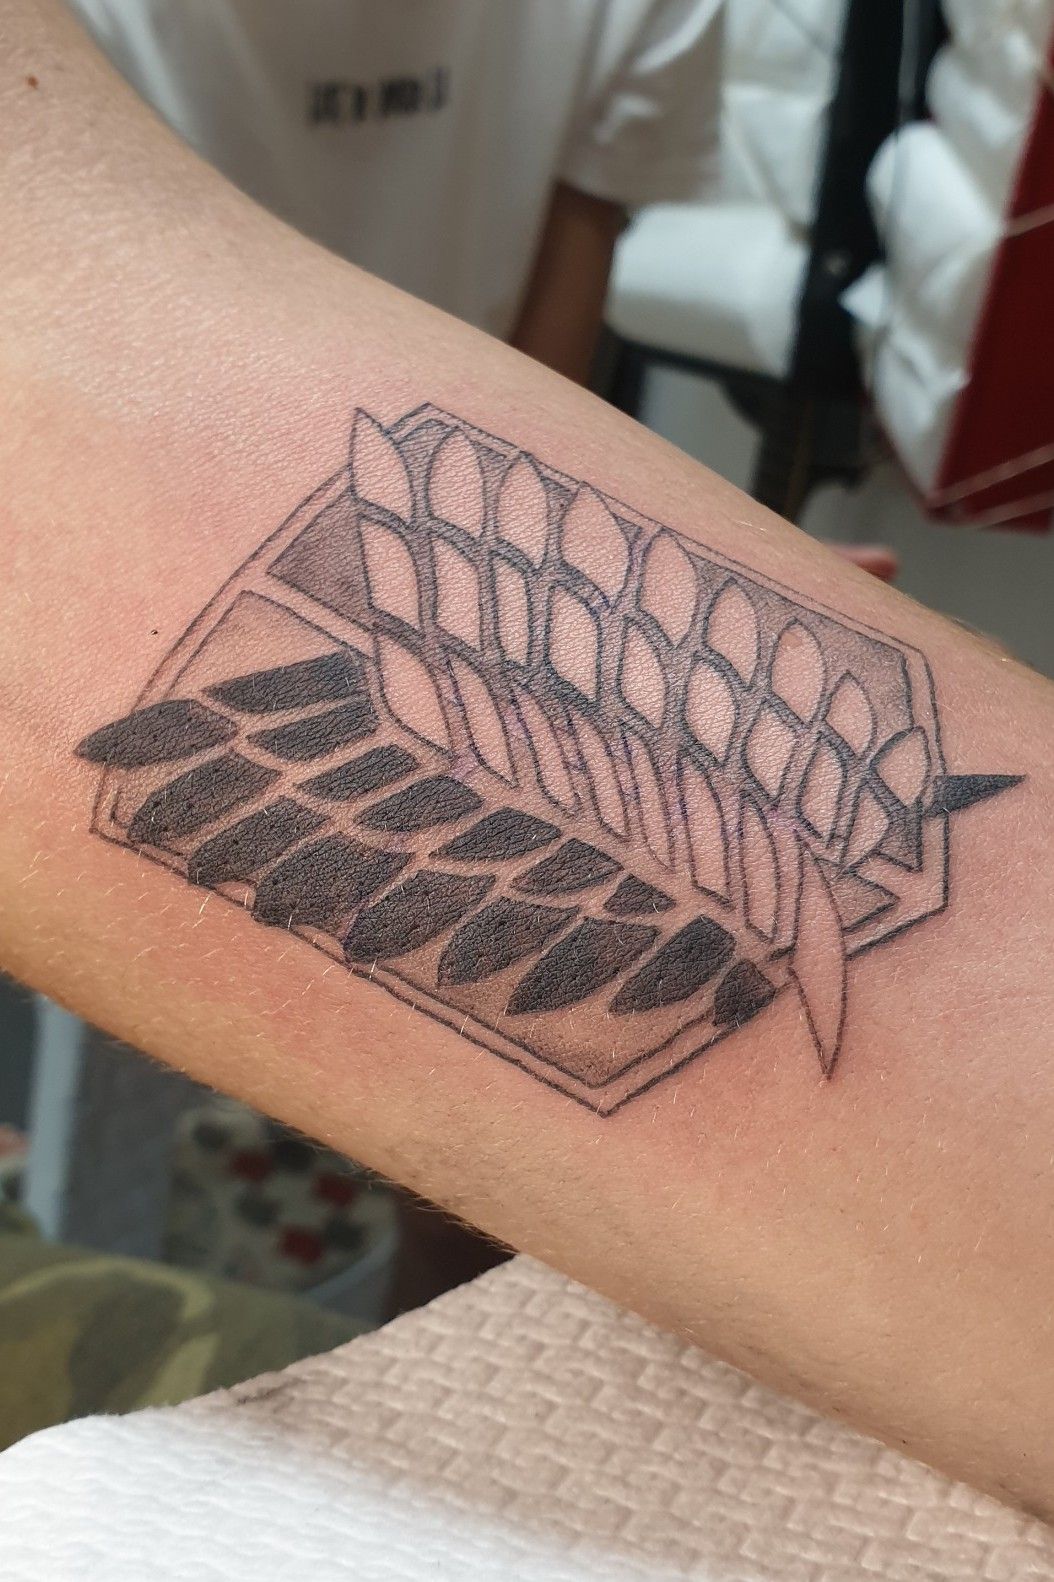 AOT tattoo sleeve by the one and only Simon K Bell I would massively  recommend his Instagramwork prints as he is a legend at animemanga  tattoos and I couldnt be more proud